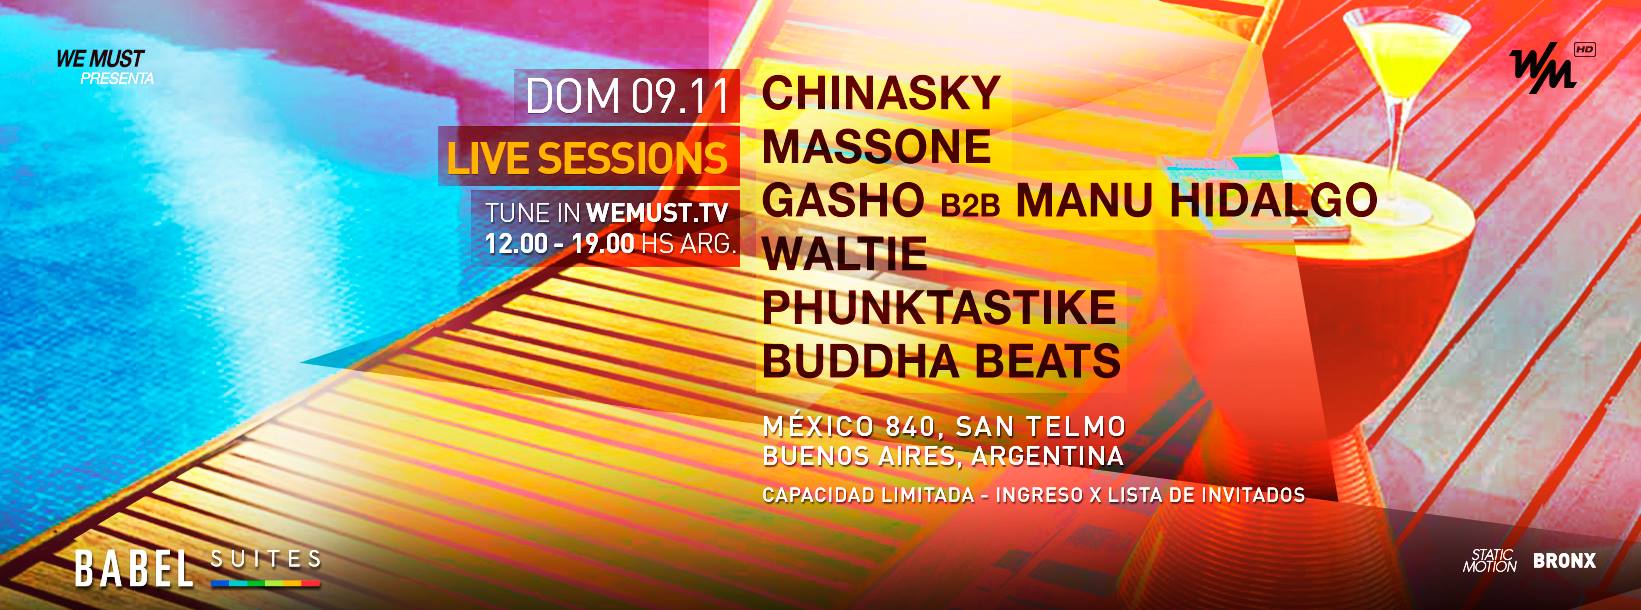 We must Live sessions 09-11